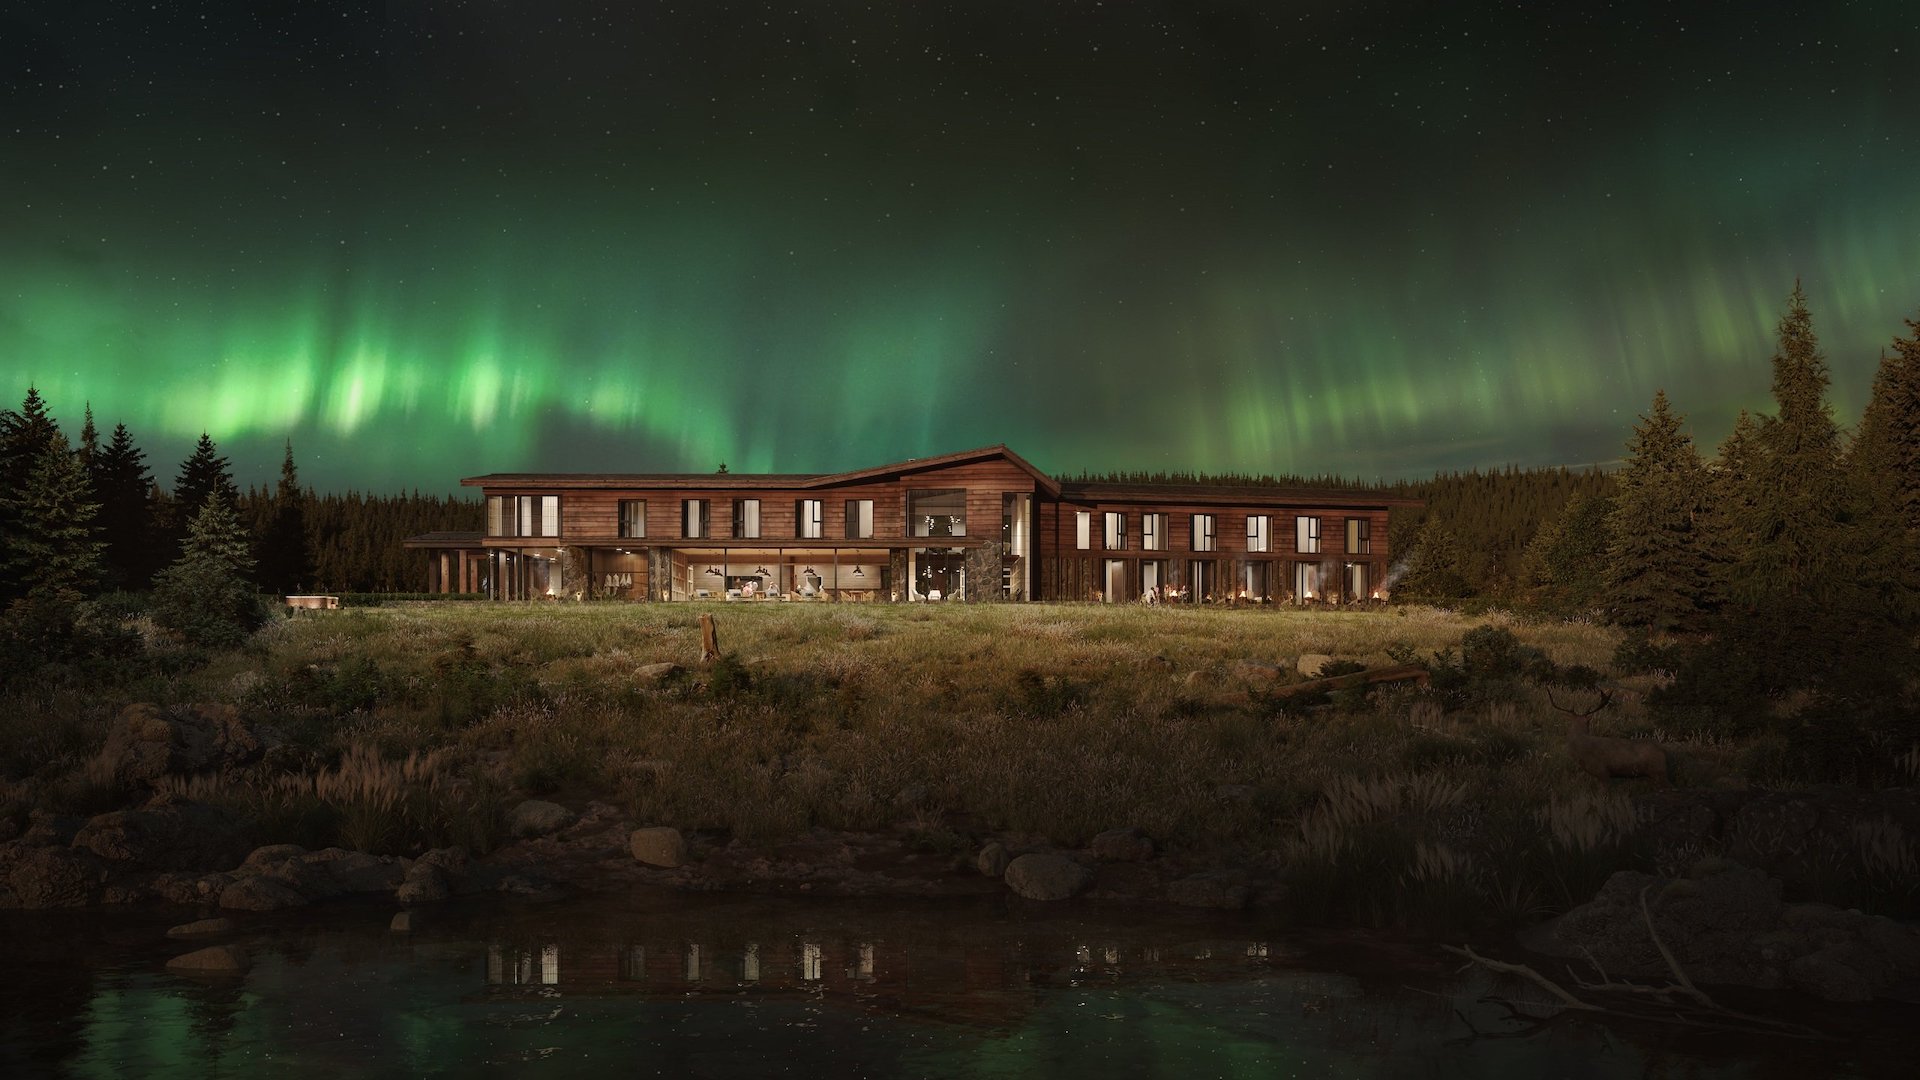 3D Architectural Visualization for a Lodge by the Lake